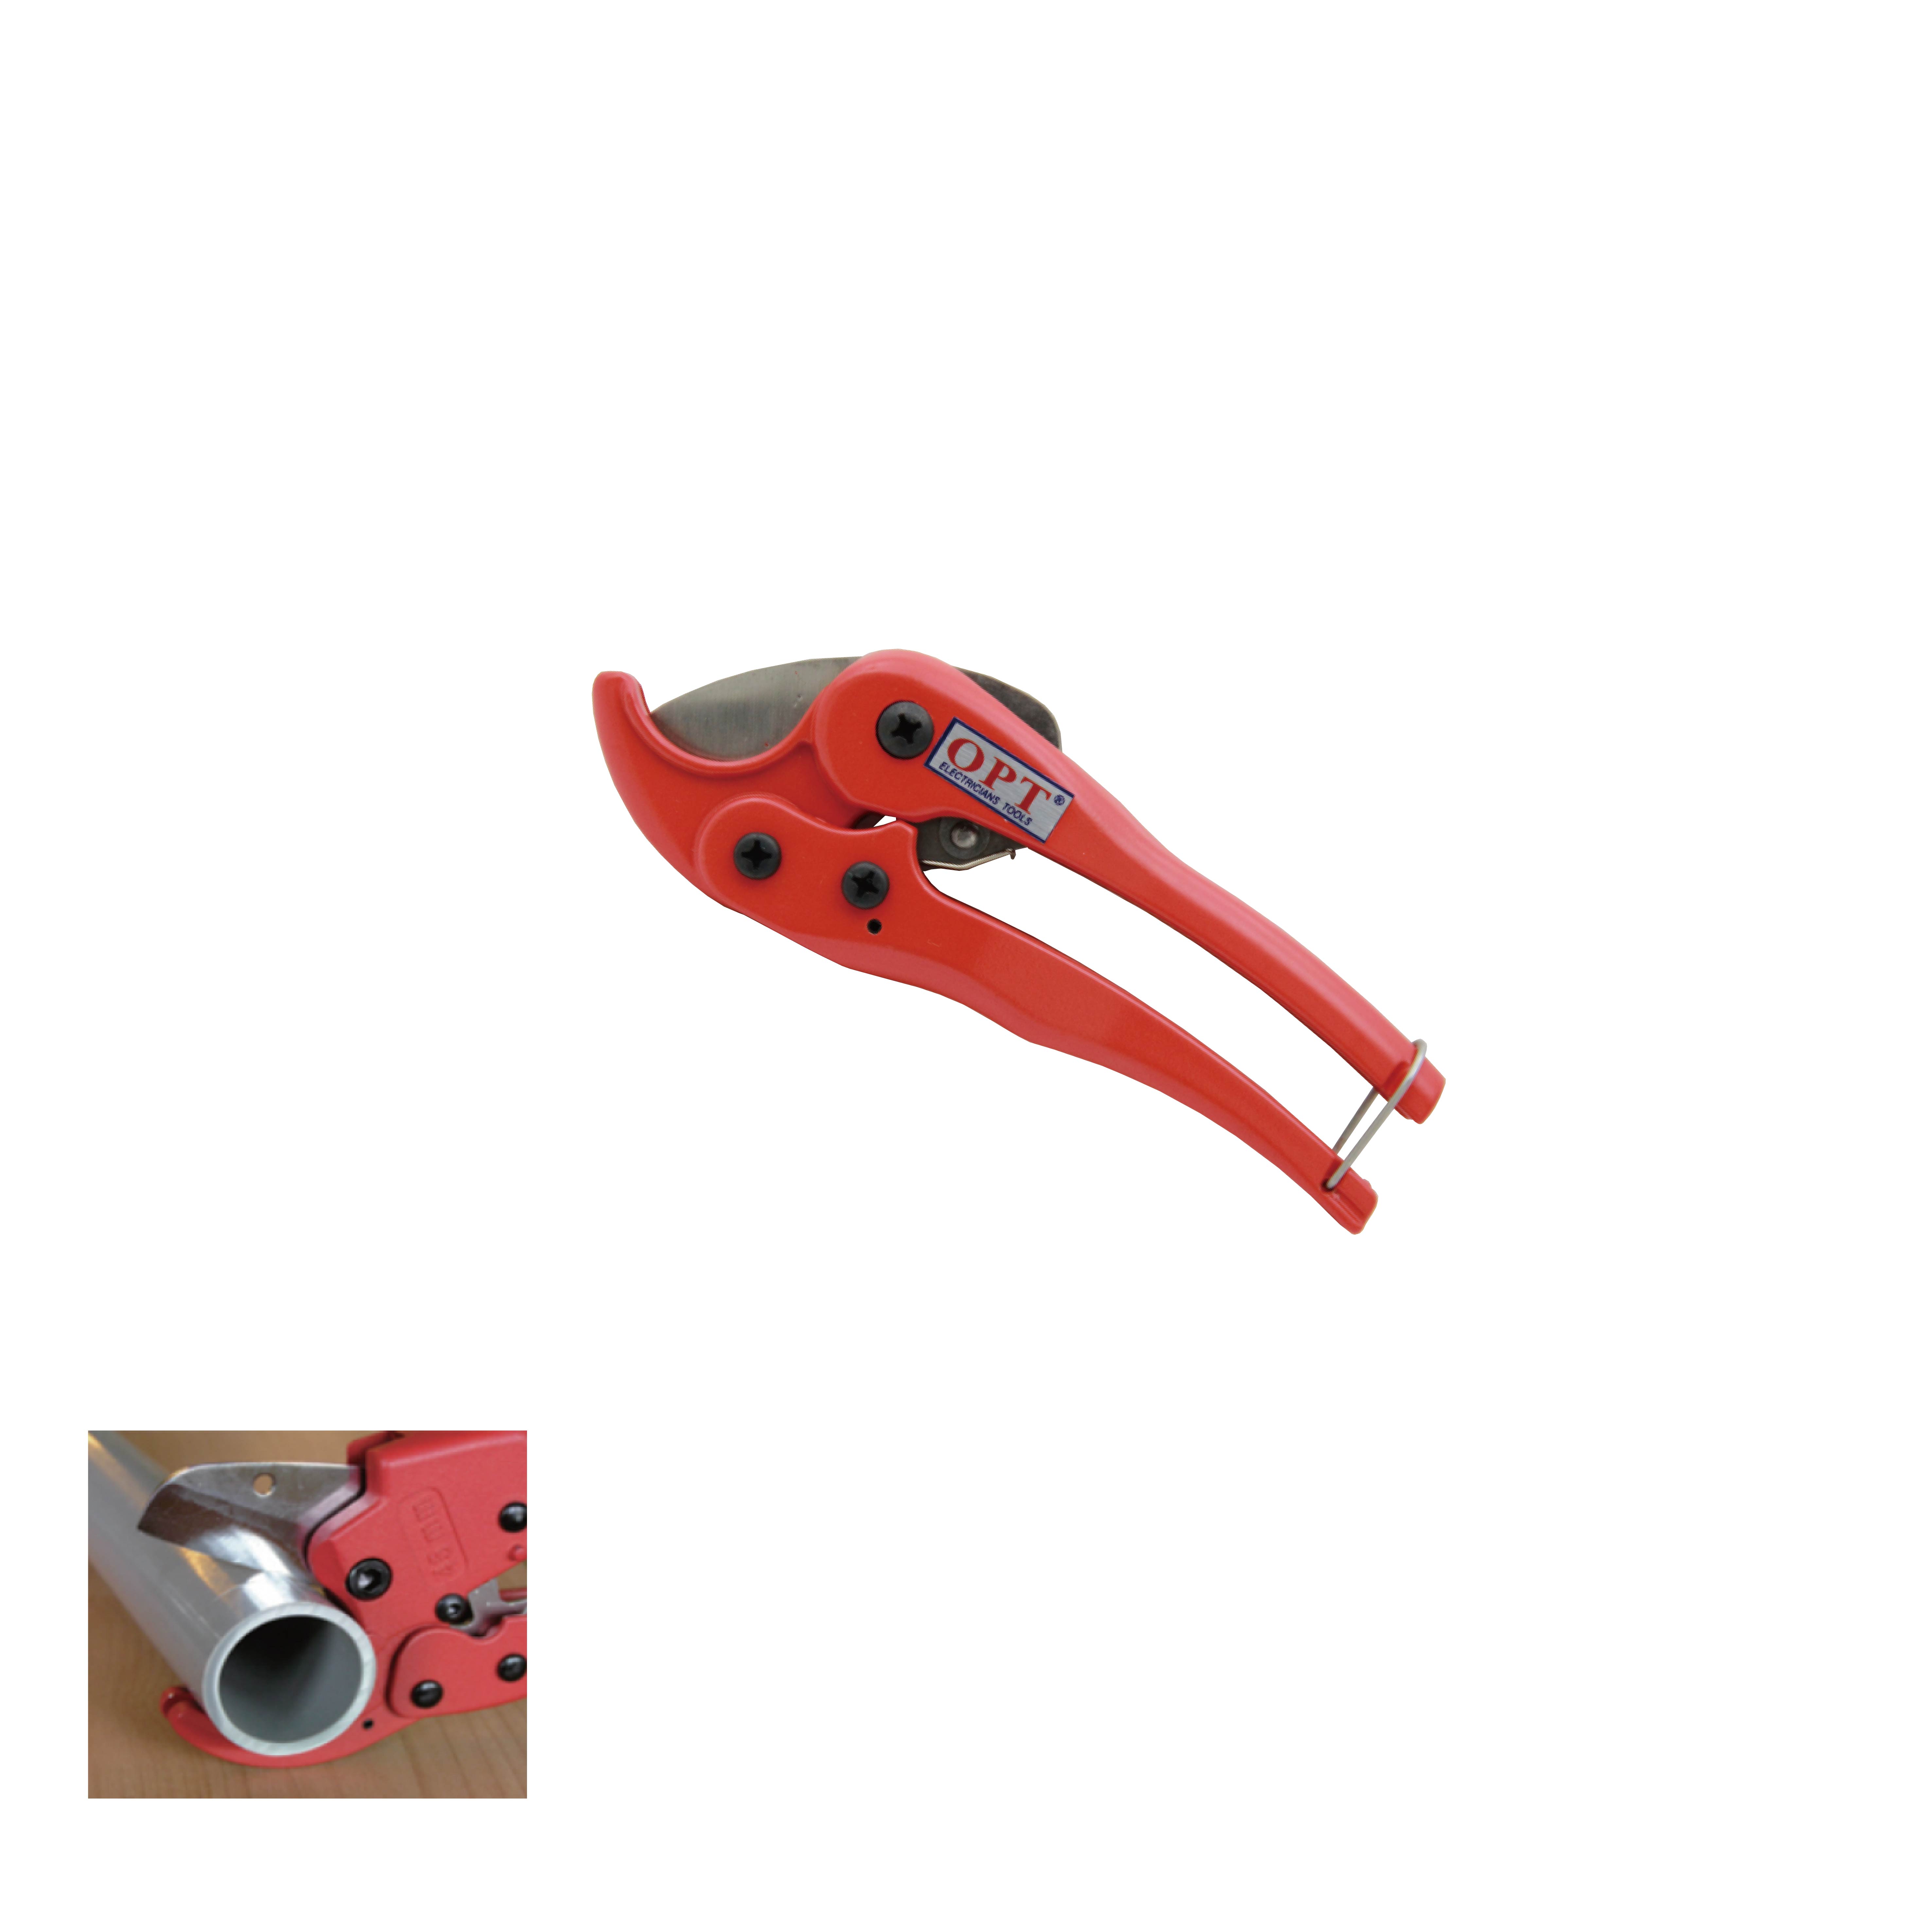 PVC pipe and wire-duct cutters